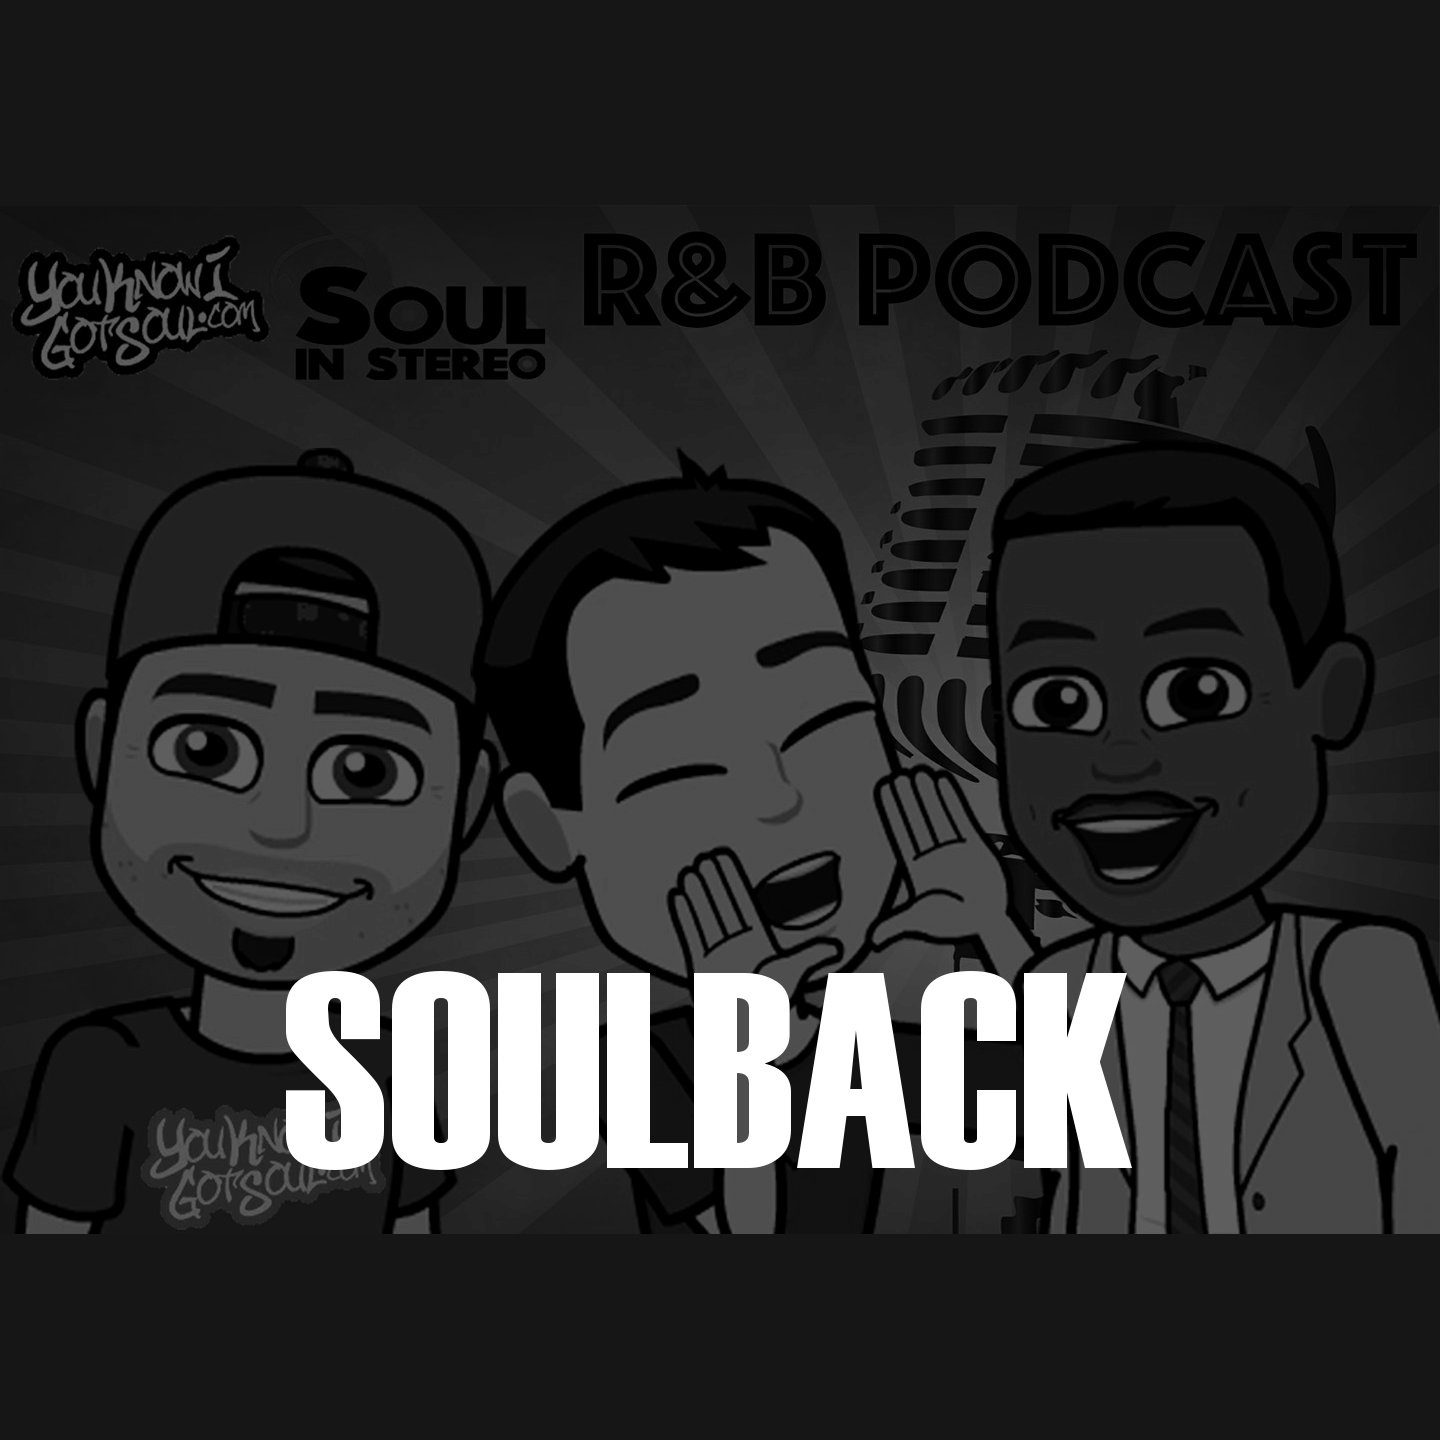 SoulBack (featuring Mr. Dalvin of Jodeci) - The R&B Podcast Episode 4